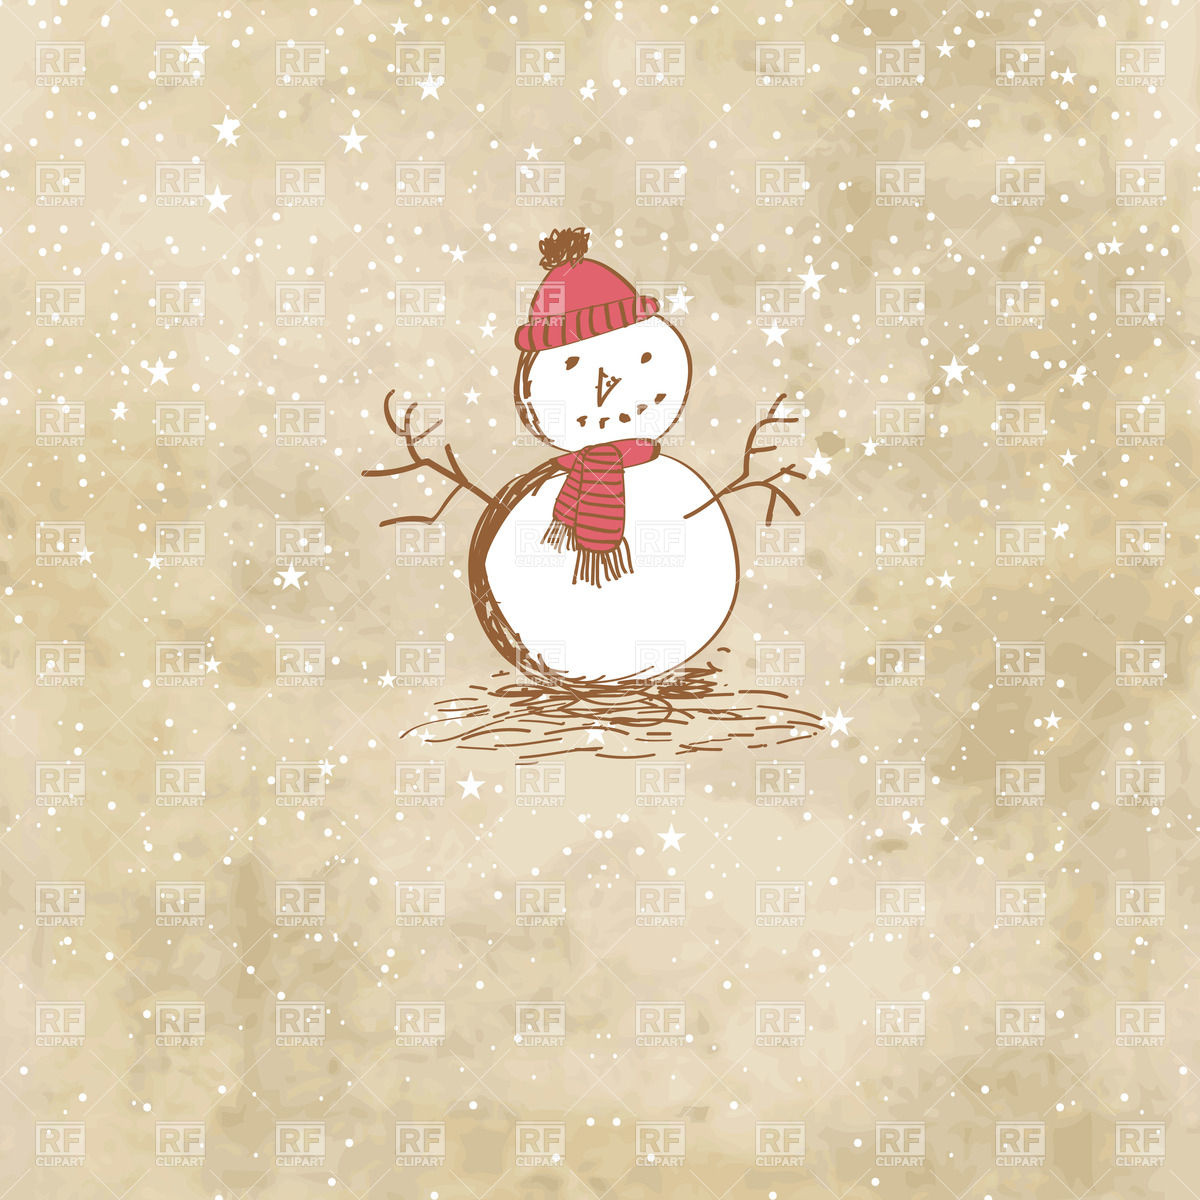 Vintage Winter Card With Snowman And Snowfall Download Royalty Free